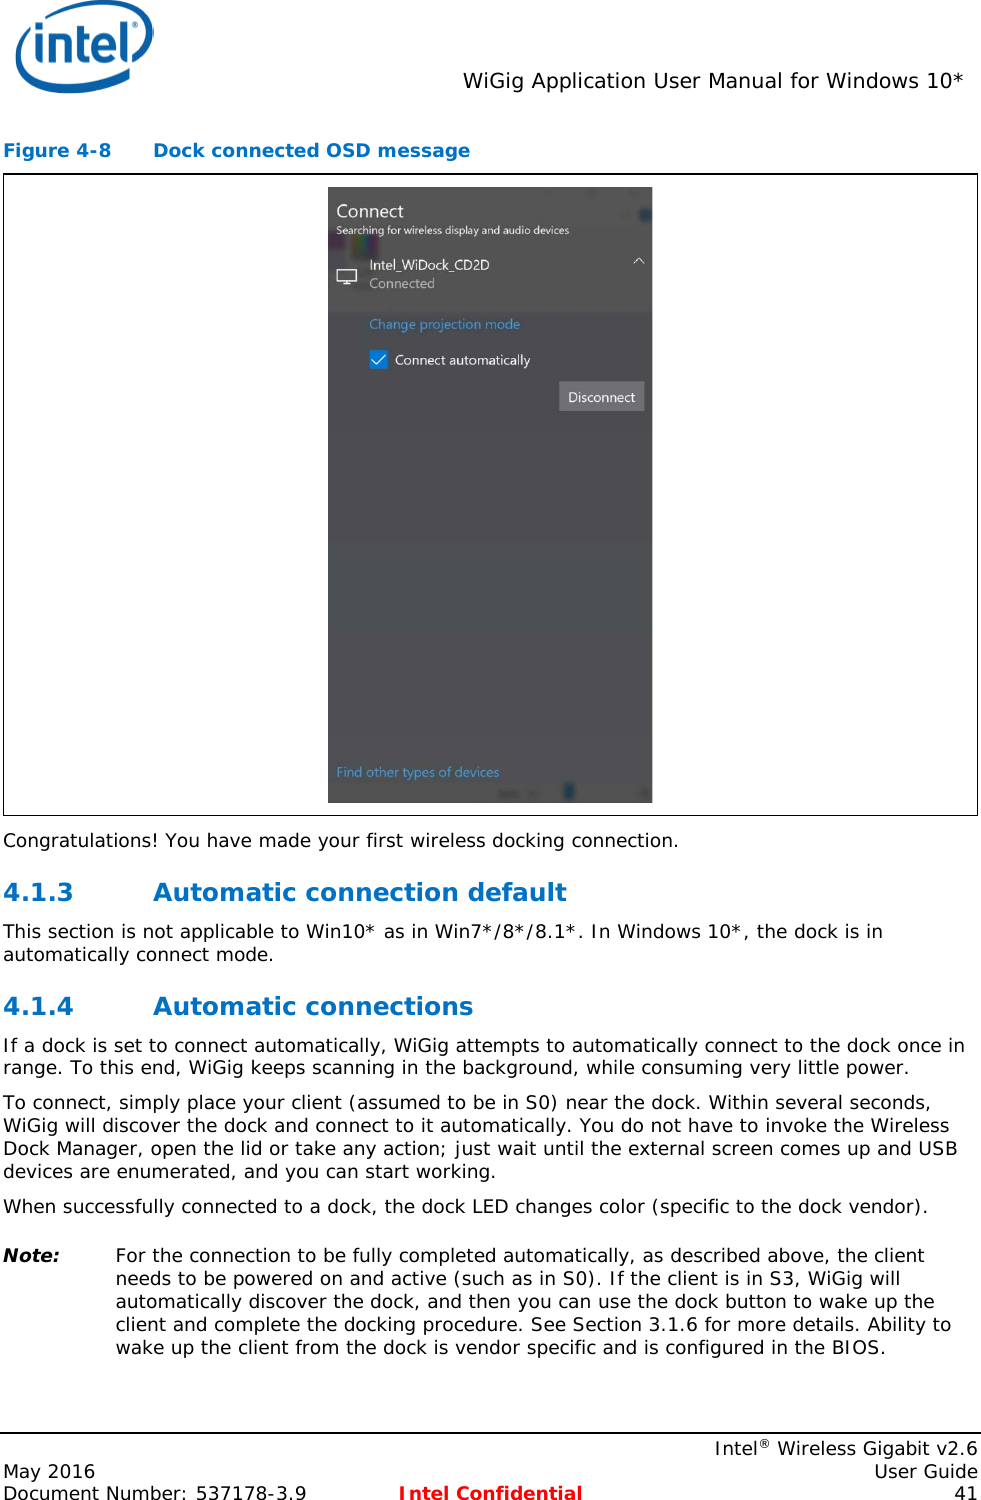  WiGig Application User Manual for Windows 10*    Intel® Wireless Gigabit v2.6 May 2016    User Guide Document Number: 537178-3.9 Intel Confidential 41 Figure 4-8  Dock connected OSD message  Congratulations! You have made your first wireless docking connection. 4.1.3 Automatic connection default This section is not applicable to Win10* as in Win7*/8*/8.1*. In Windows 10*, the dock is in automatically connect mode. 4.1.4 Automatic connections If a dock is set to connect automatically, WiGig attempts to automatically connect to the dock once in range. To this end, WiGig keeps scanning in the background, while consuming very little power. To connect, simply place your client (assumed to be in S0) near the dock. Within several seconds, WiGig will discover the dock and connect to it automatically. You do not have to invoke the Wireless Dock Manager, open the lid or take any action; just wait until the external screen comes up and USB devices are enumerated, and you can start working. When successfully connected to a dock, the dock LED changes color (specific to the dock vendor). Note: For the connection to be fully completed automatically, as described above, the client needs to be powered on and active (such as in S0). If the client is in S3, WiGig will automatically discover the dock, and then you can use the dock button to wake up the client and complete the docking procedure. See Section 3.1.6 for more details. Ability to wake up the client from the dock is vendor specific and is configured in the BIOS. 